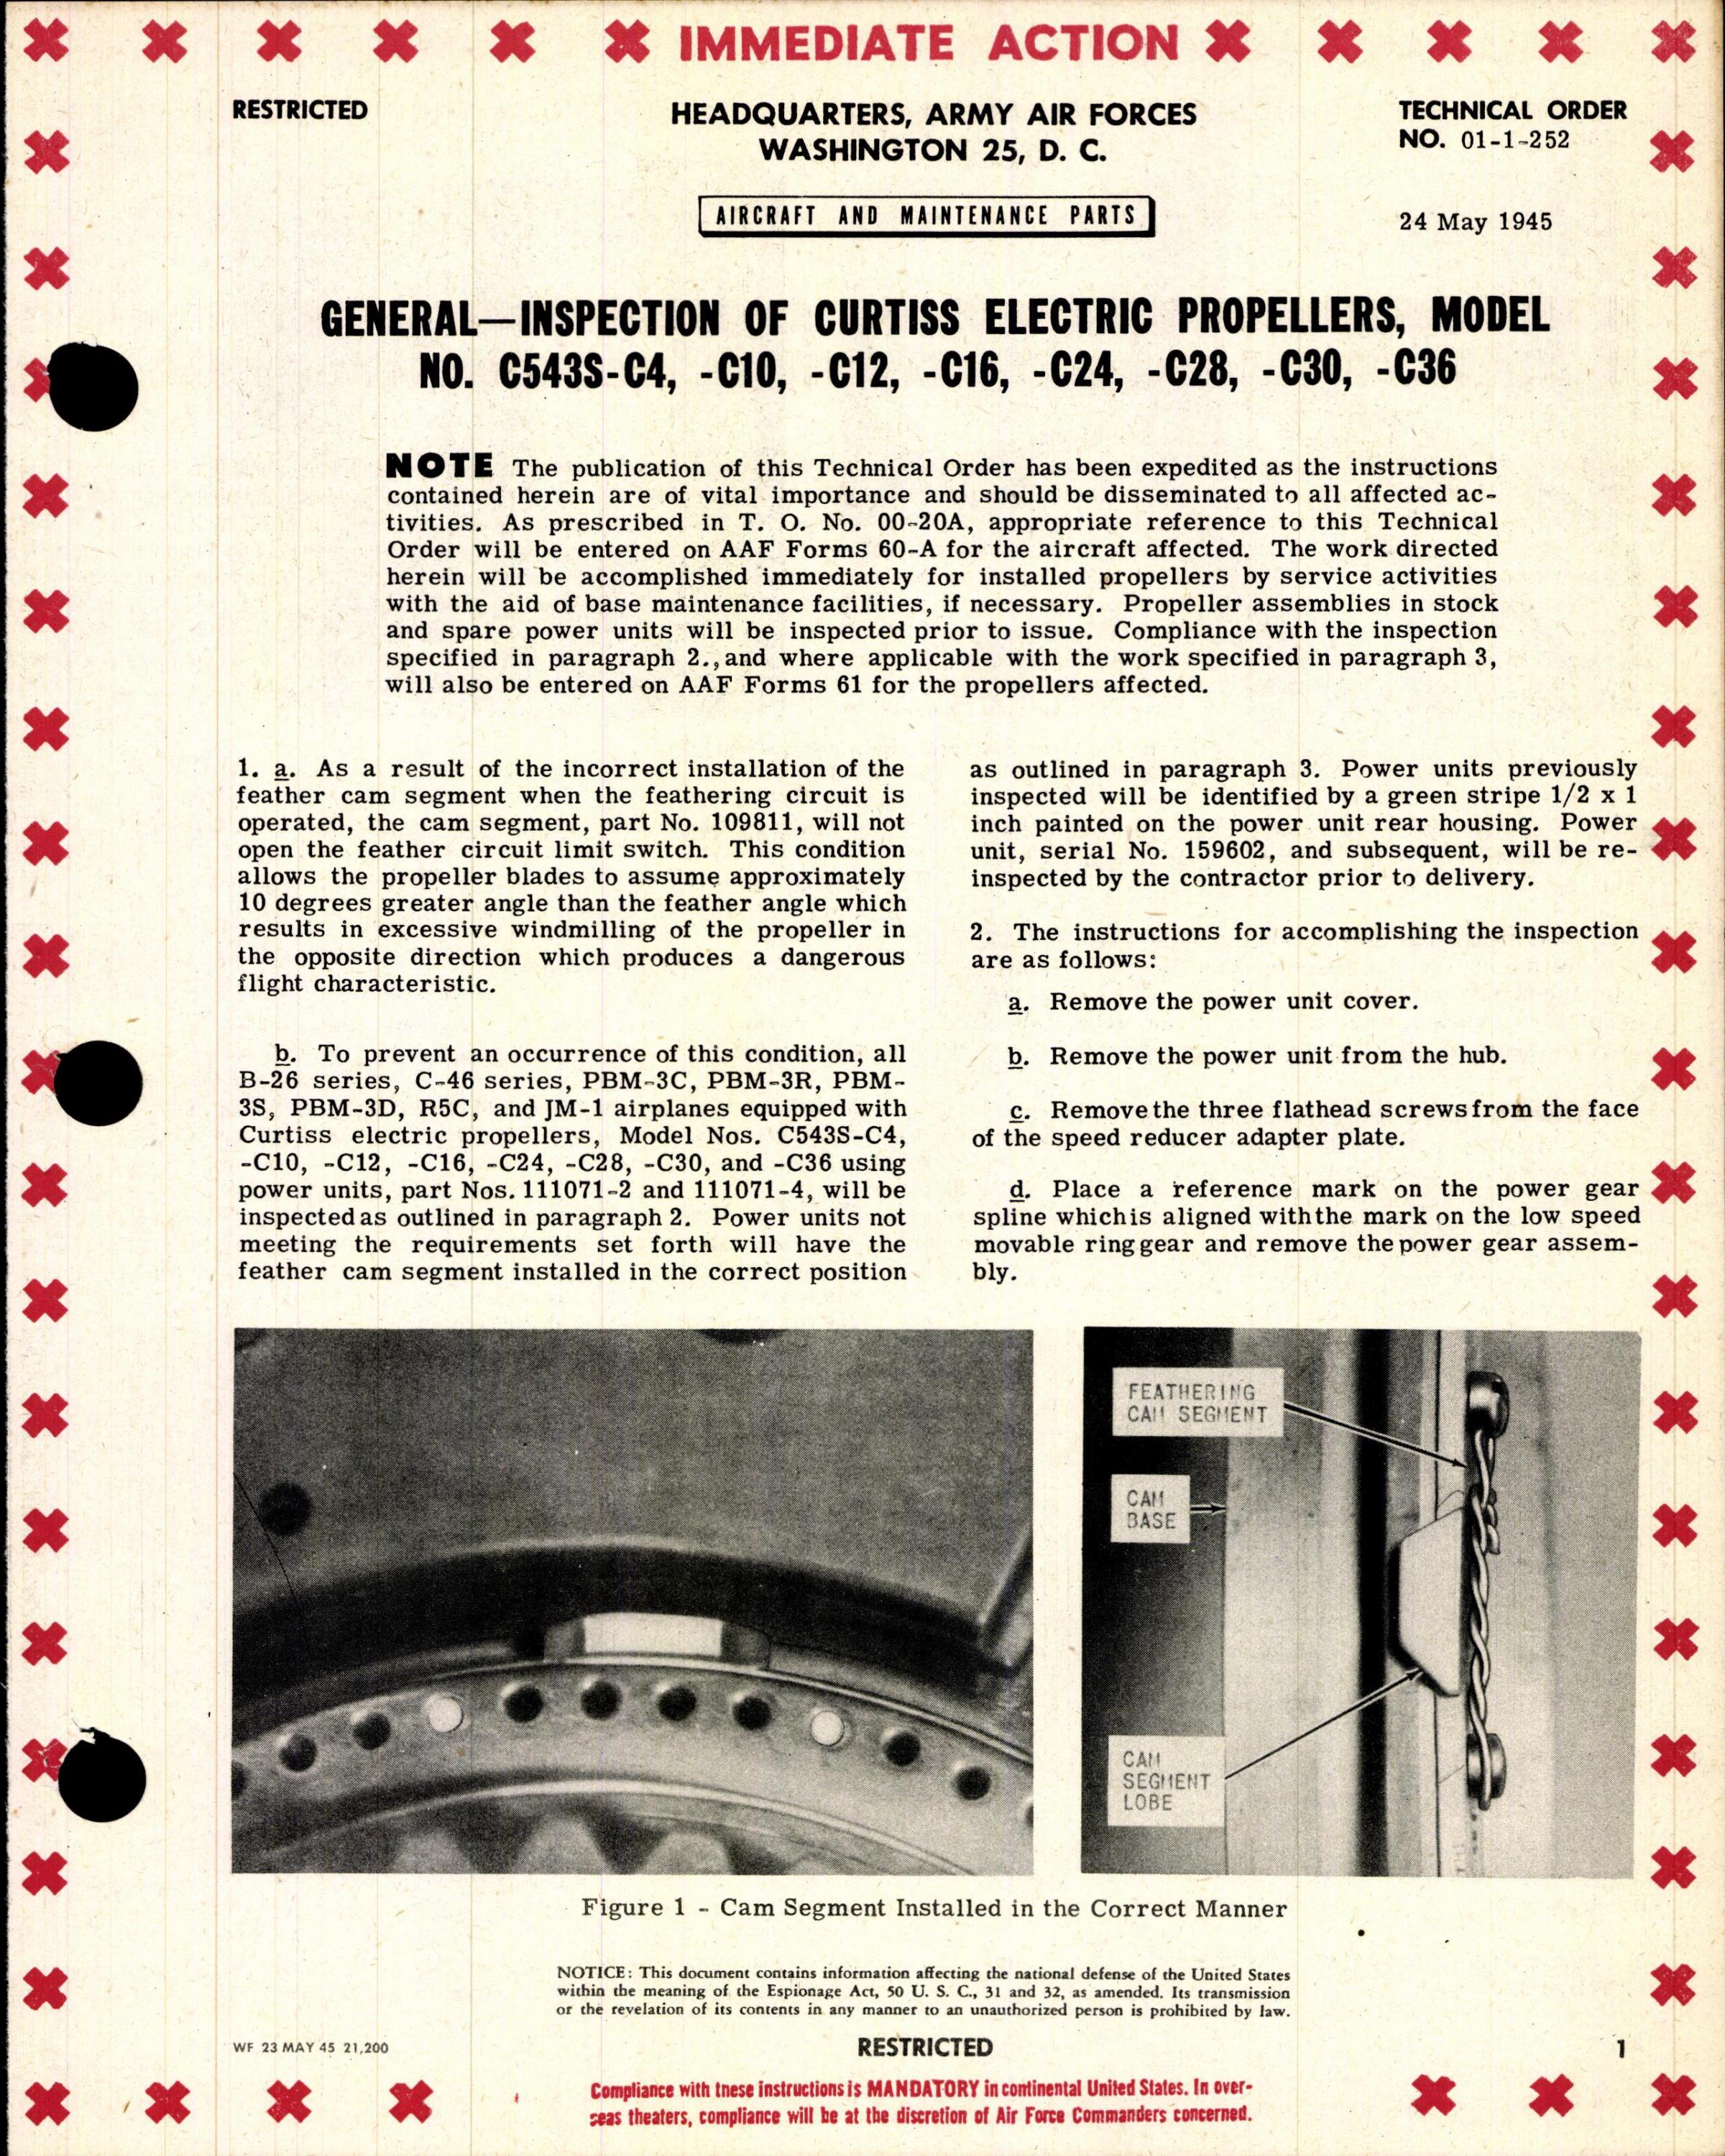 Sample page 1 from AirCorps Library document: Inspection of Curtiss Electric Propellers